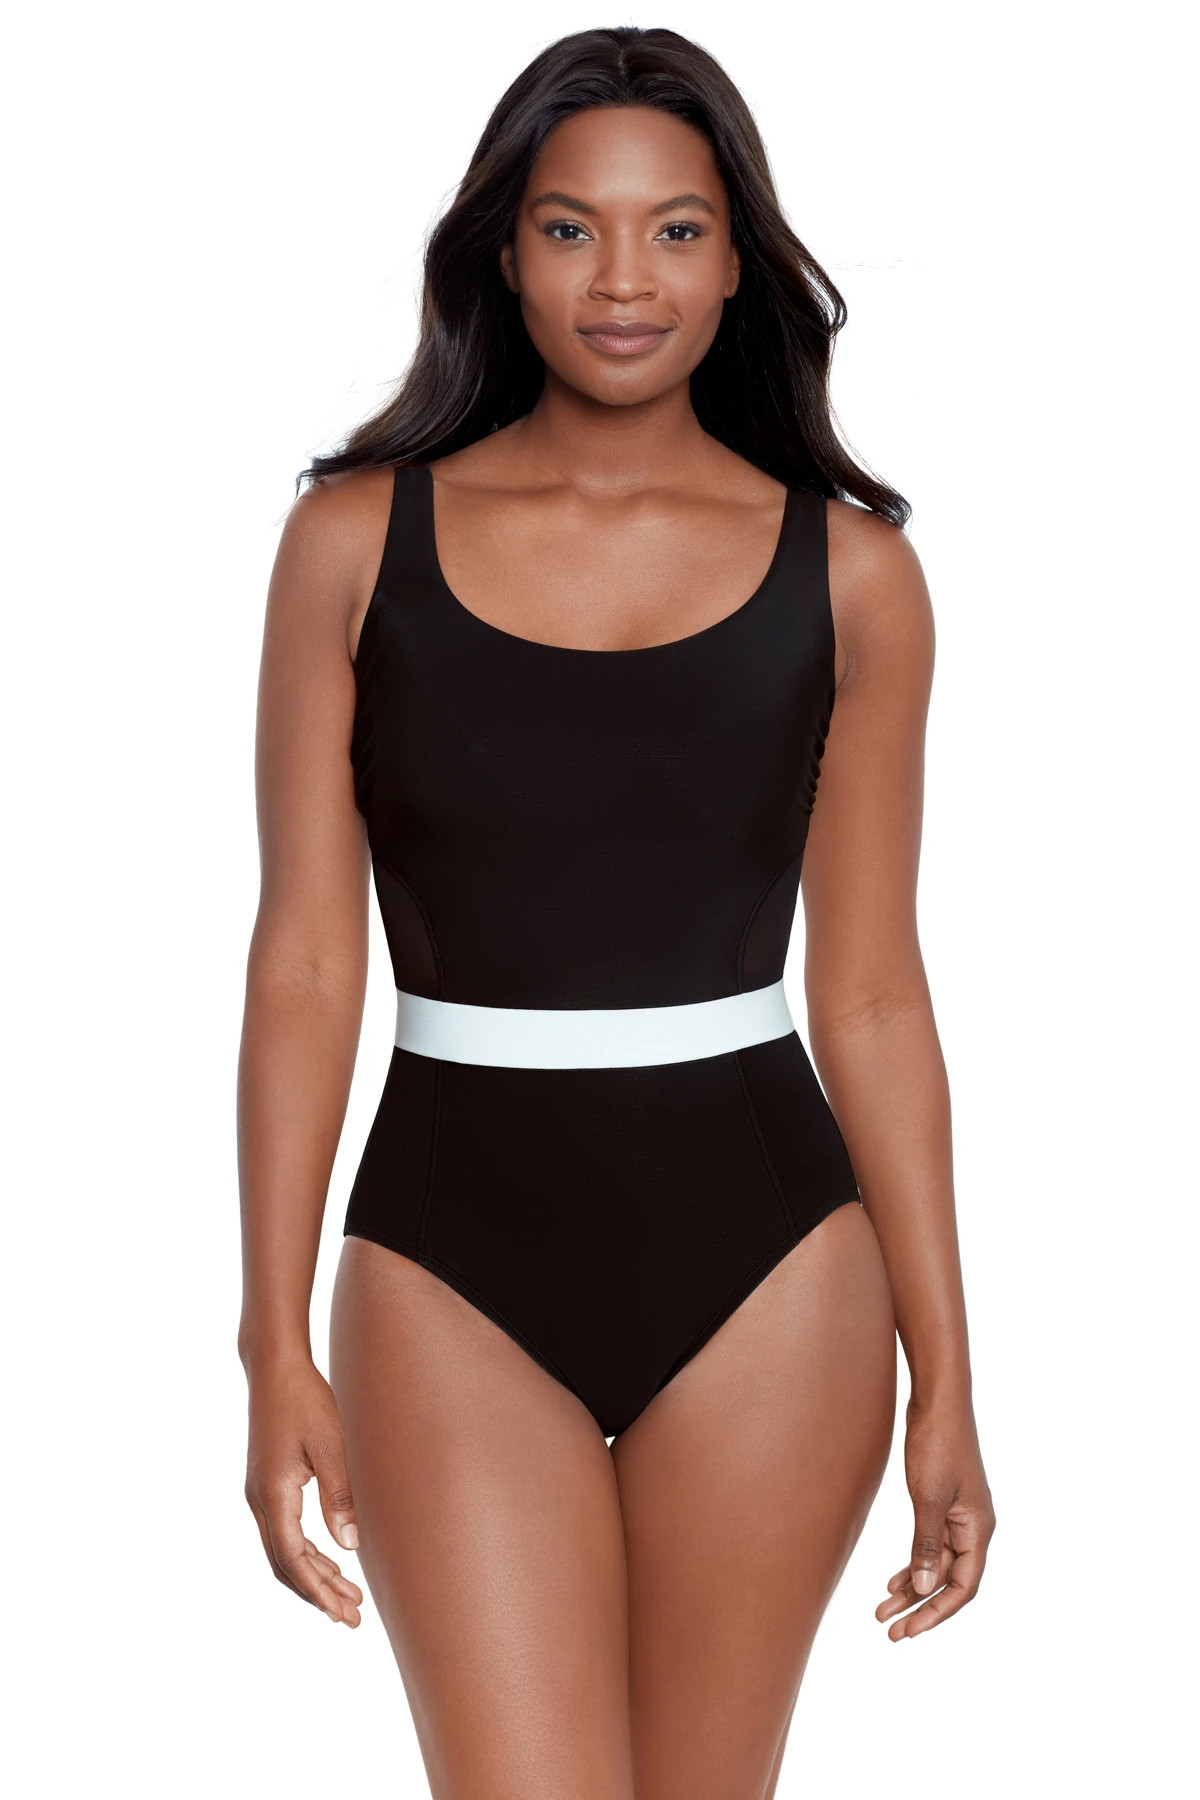 BLACK/WHITE Spectra Somerland One Piece Swimsuit image number 1